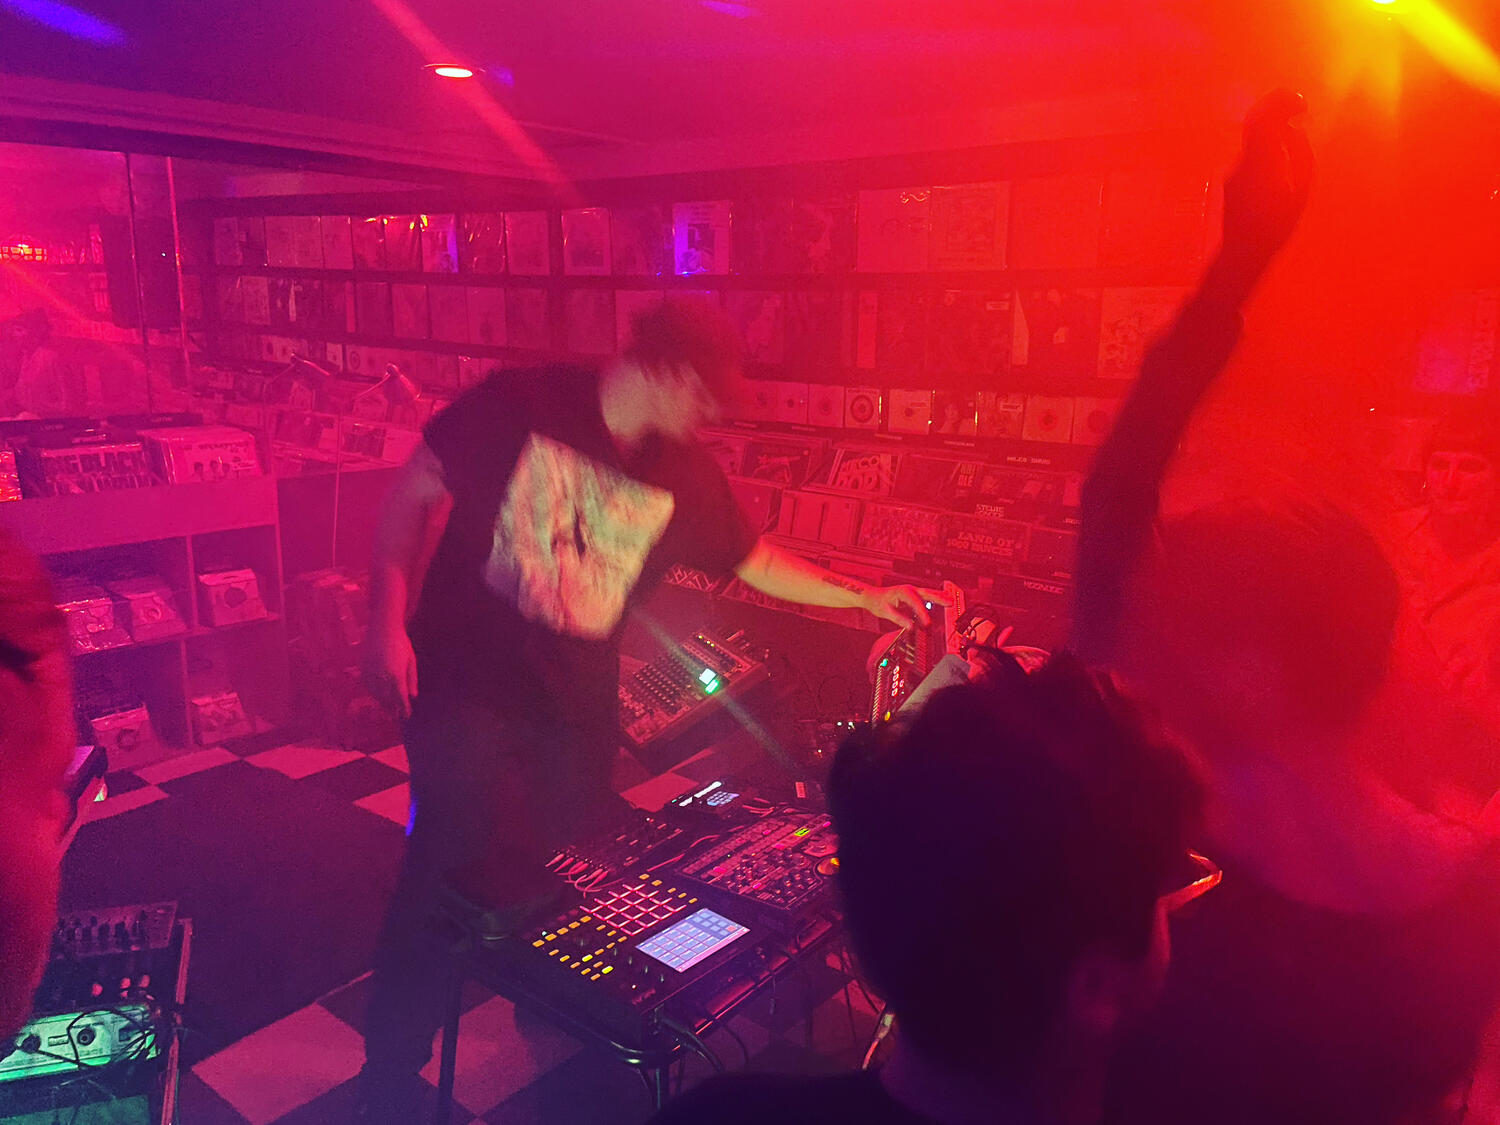 An electronic musician tweaking a synth under multicolored lights in front of a crowd